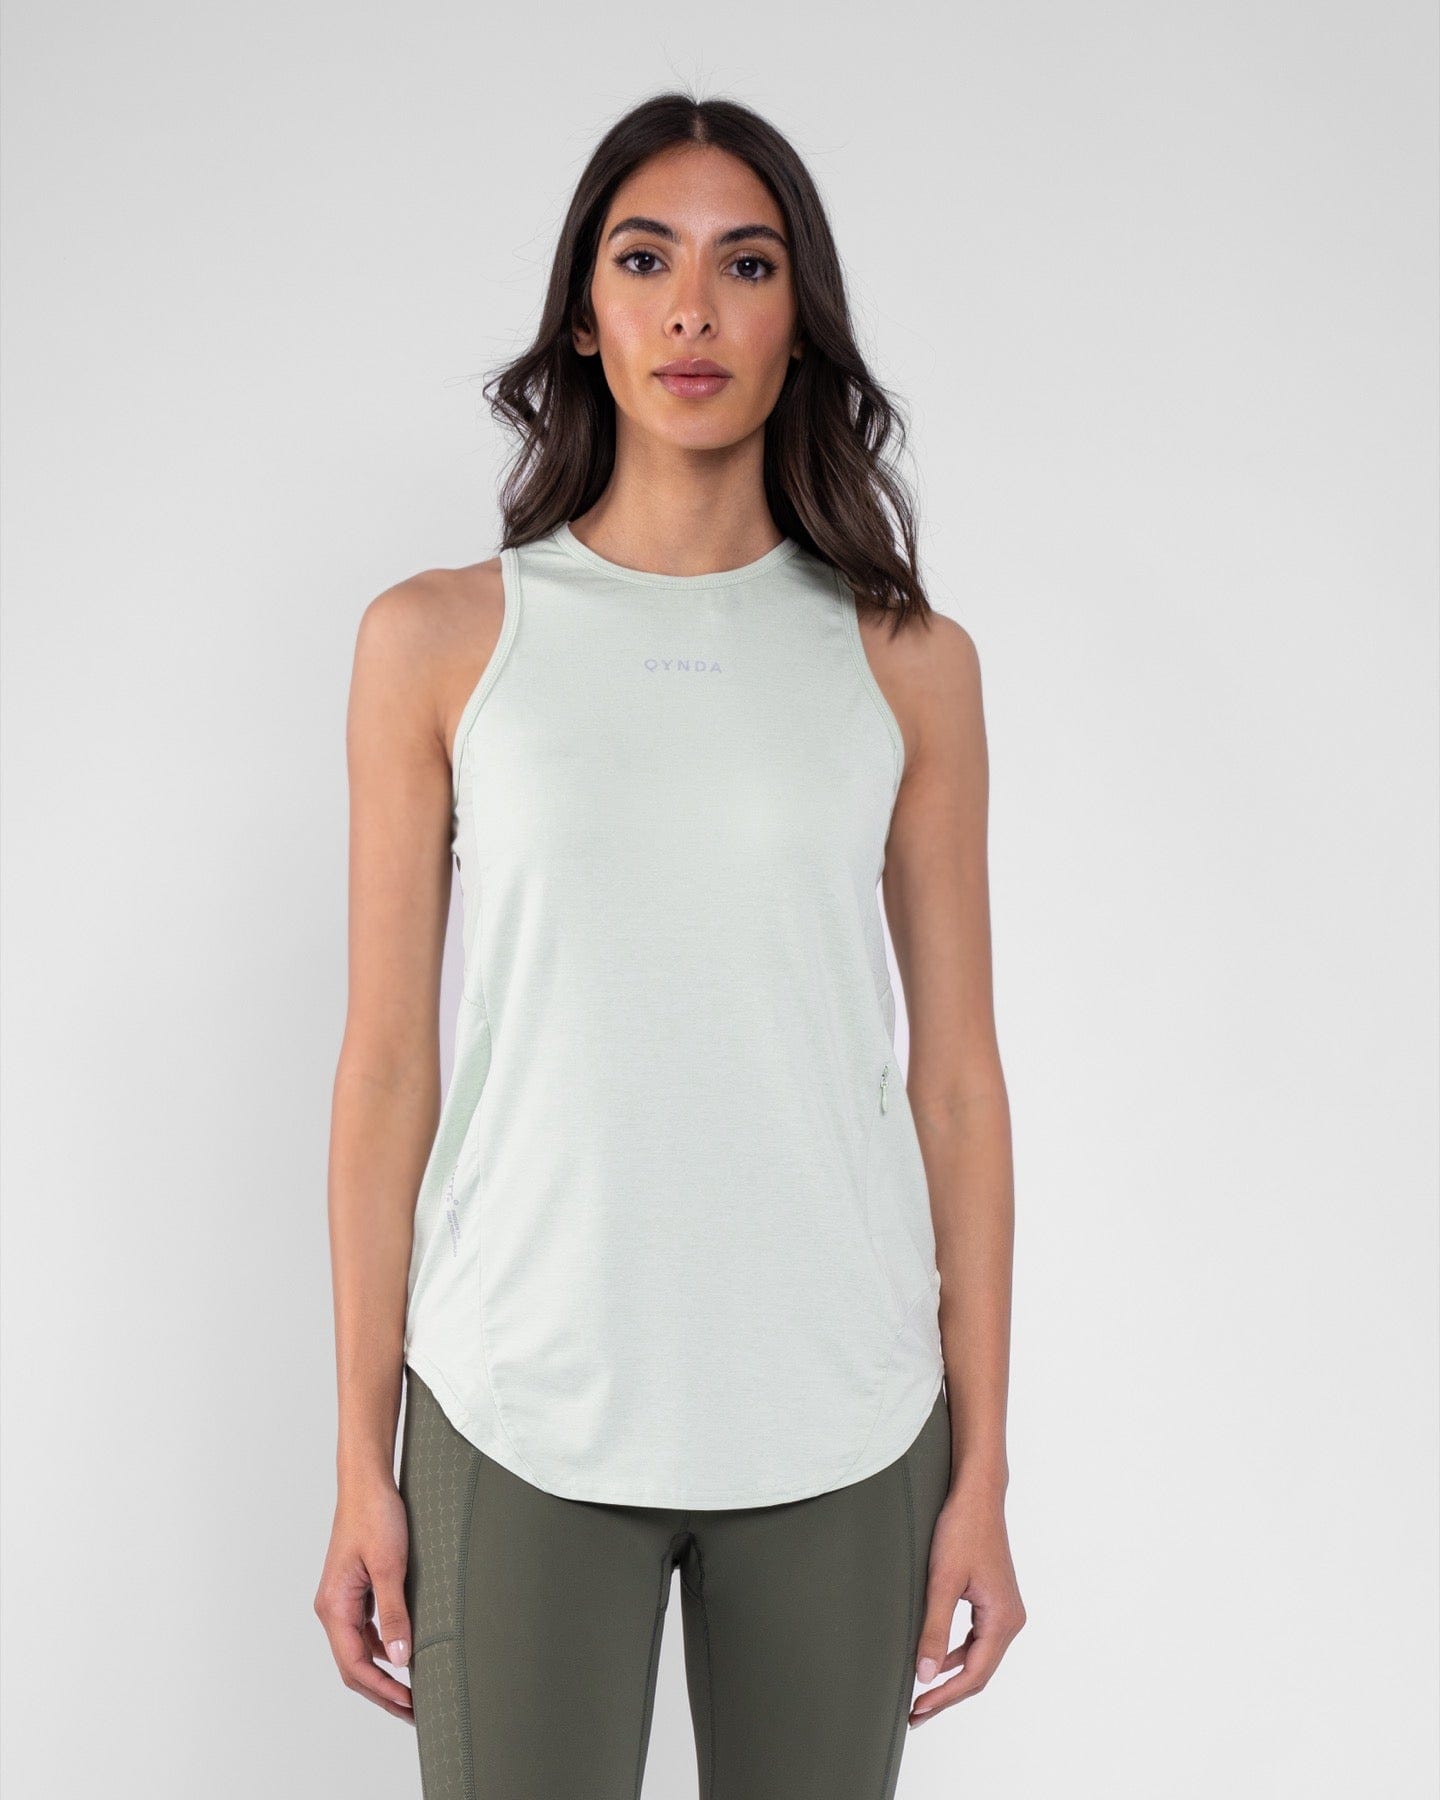 A woman in a light tank top and sage leggings made with brrr° material for body temperature regulation, paired with white sneakers against a clean, grey background, showcasing a casual modest athletic outfit by qynda